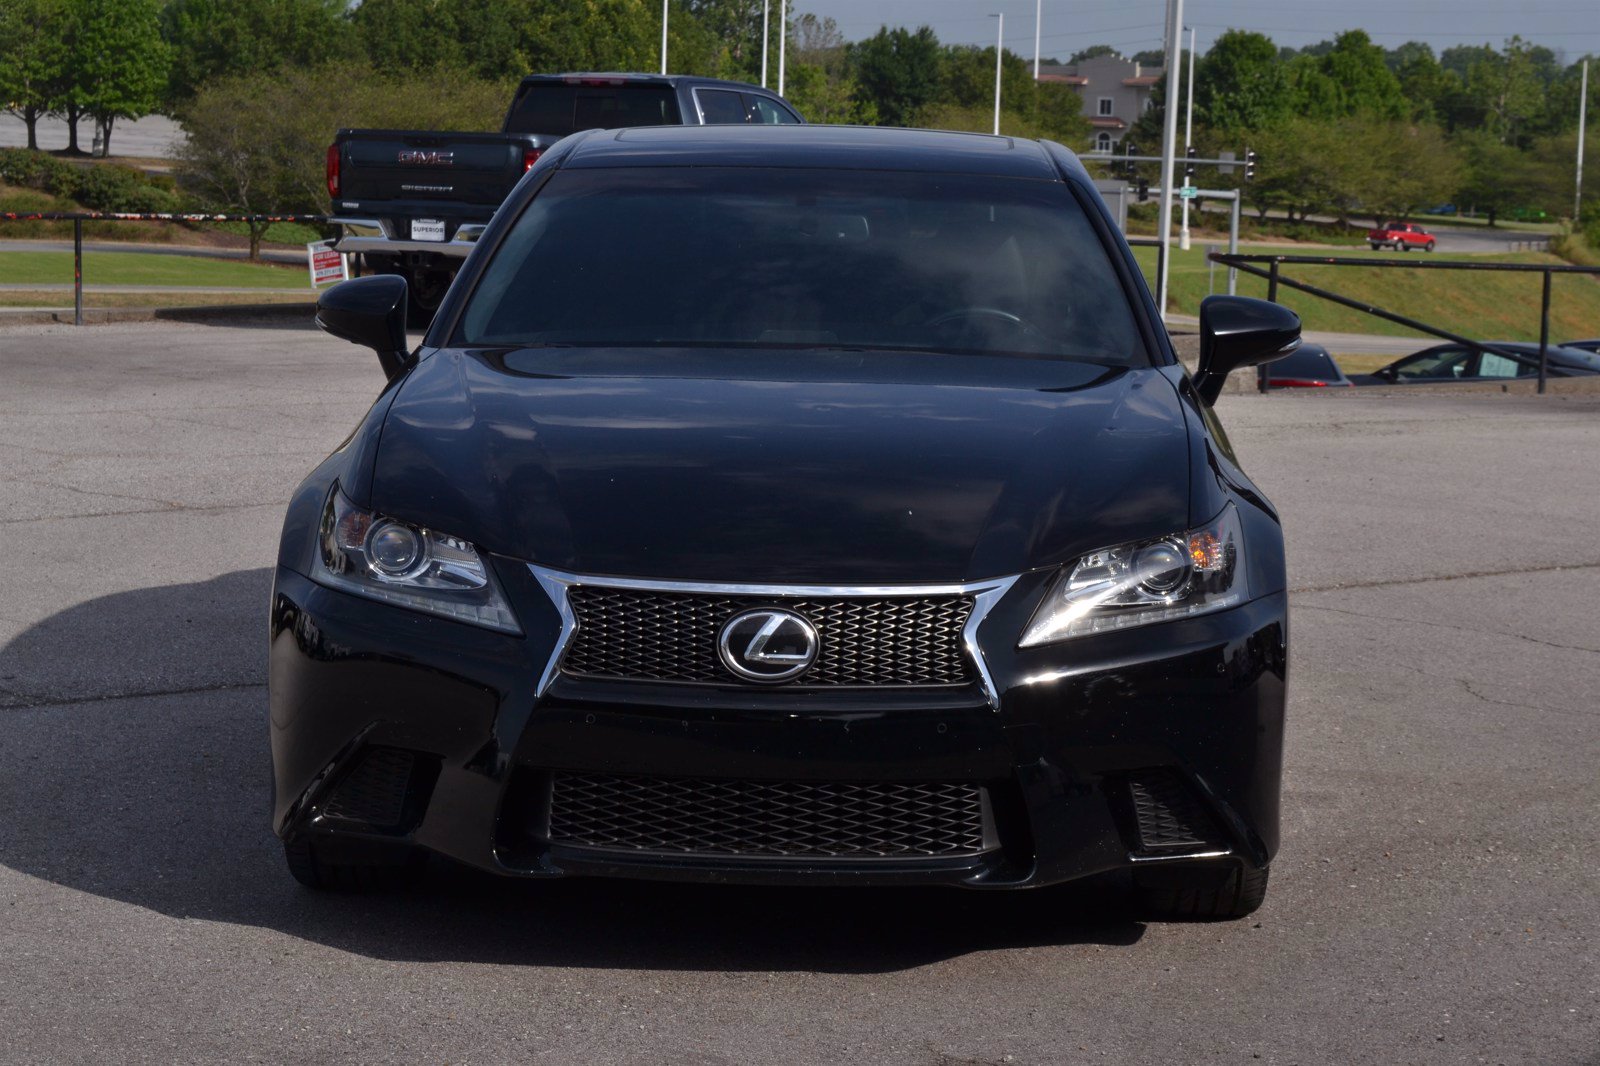 PreOwned 2015 Lexus GS 350 4dr Car in Fayetteville G3007